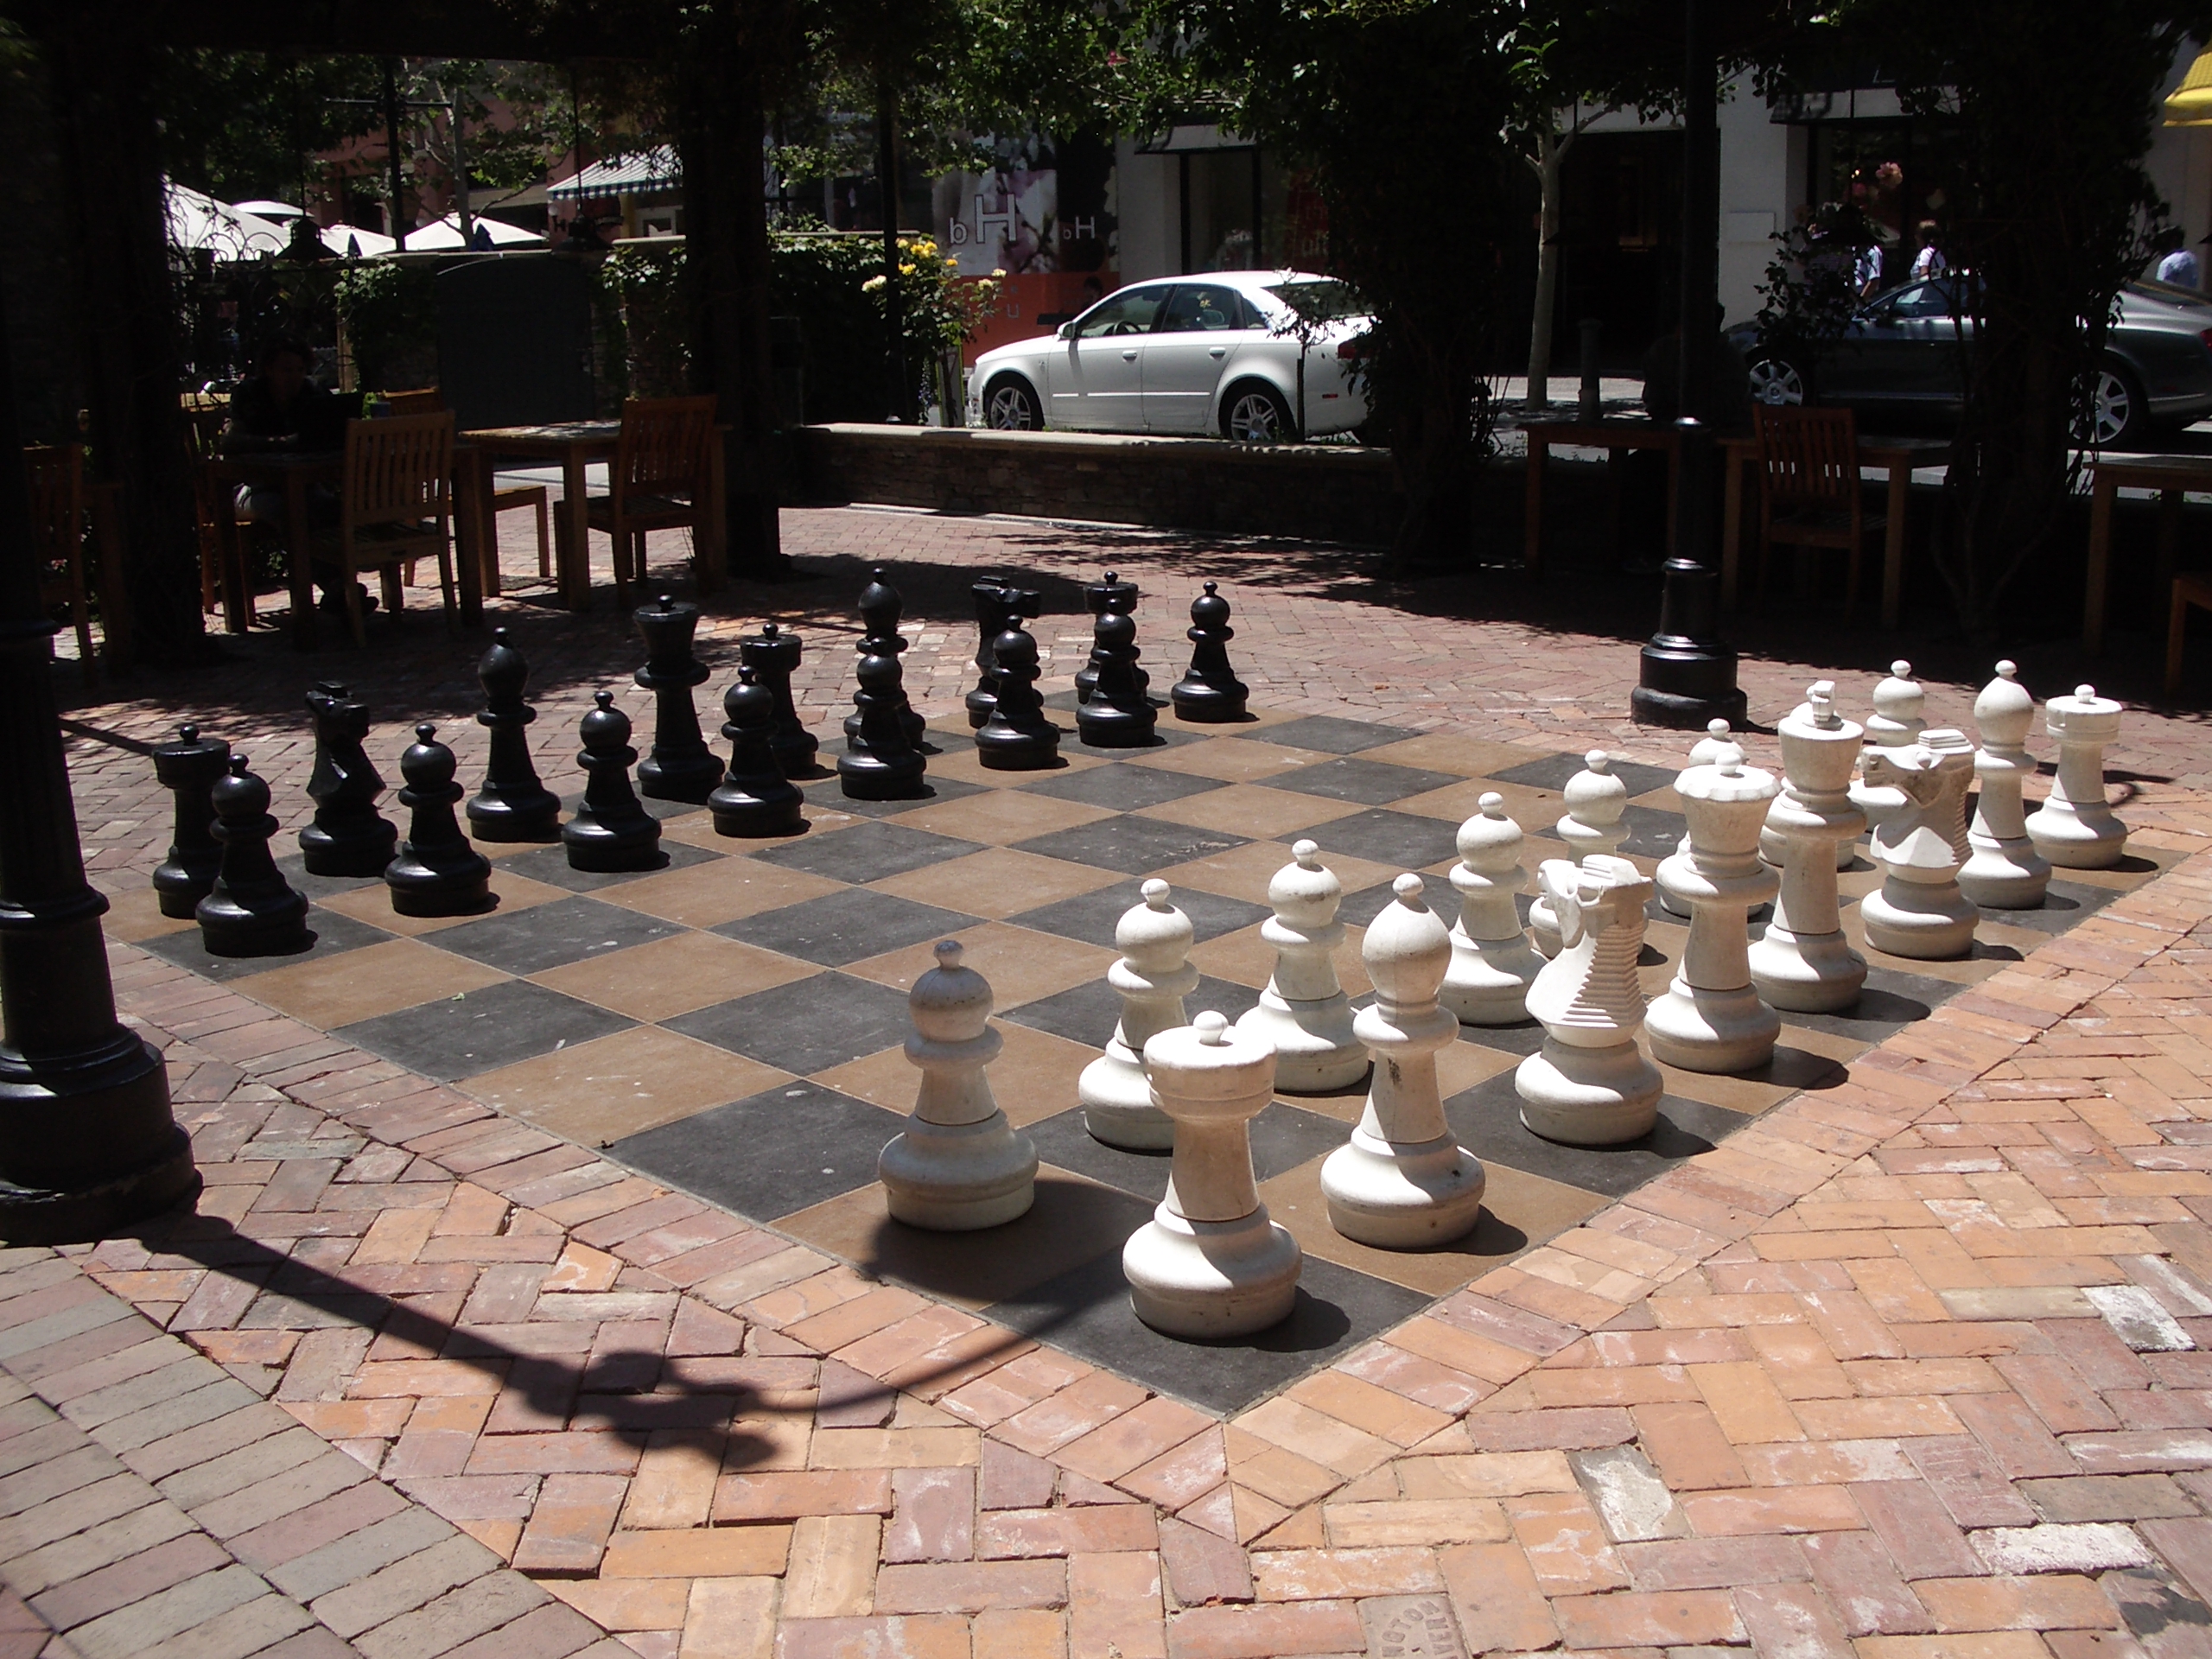 Featured Chess Set: July 2020